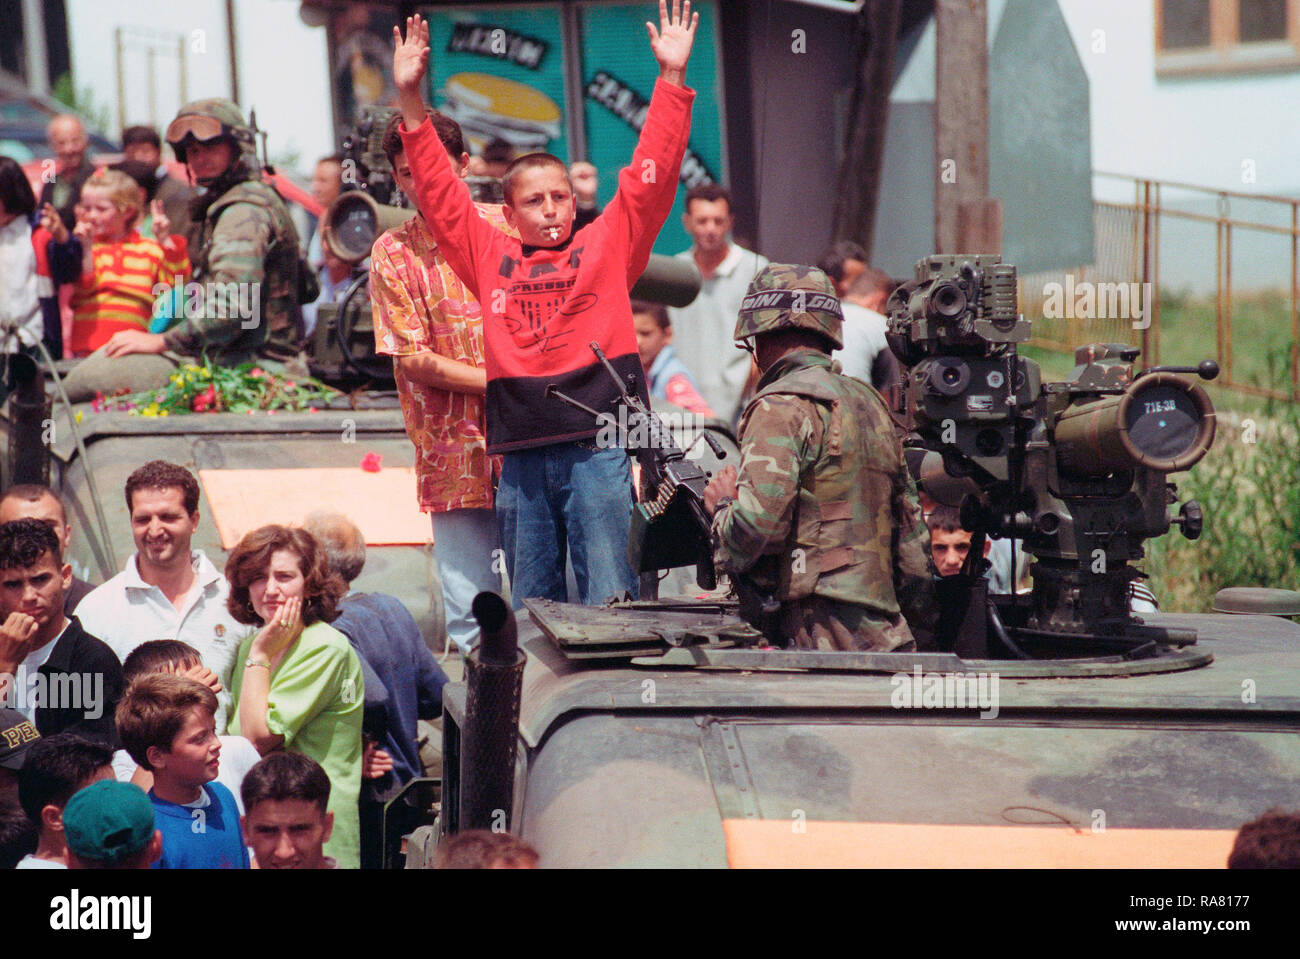 1999 - Ethenic Albanians gather in the streets for a parade held to honor American Forces in the Kosovo village of Koretin.  Kids climb on top of an M998 High-Mobility Multipurpose Wheeled Vehicle (HMMWV) with TOW missile. Stock Photo